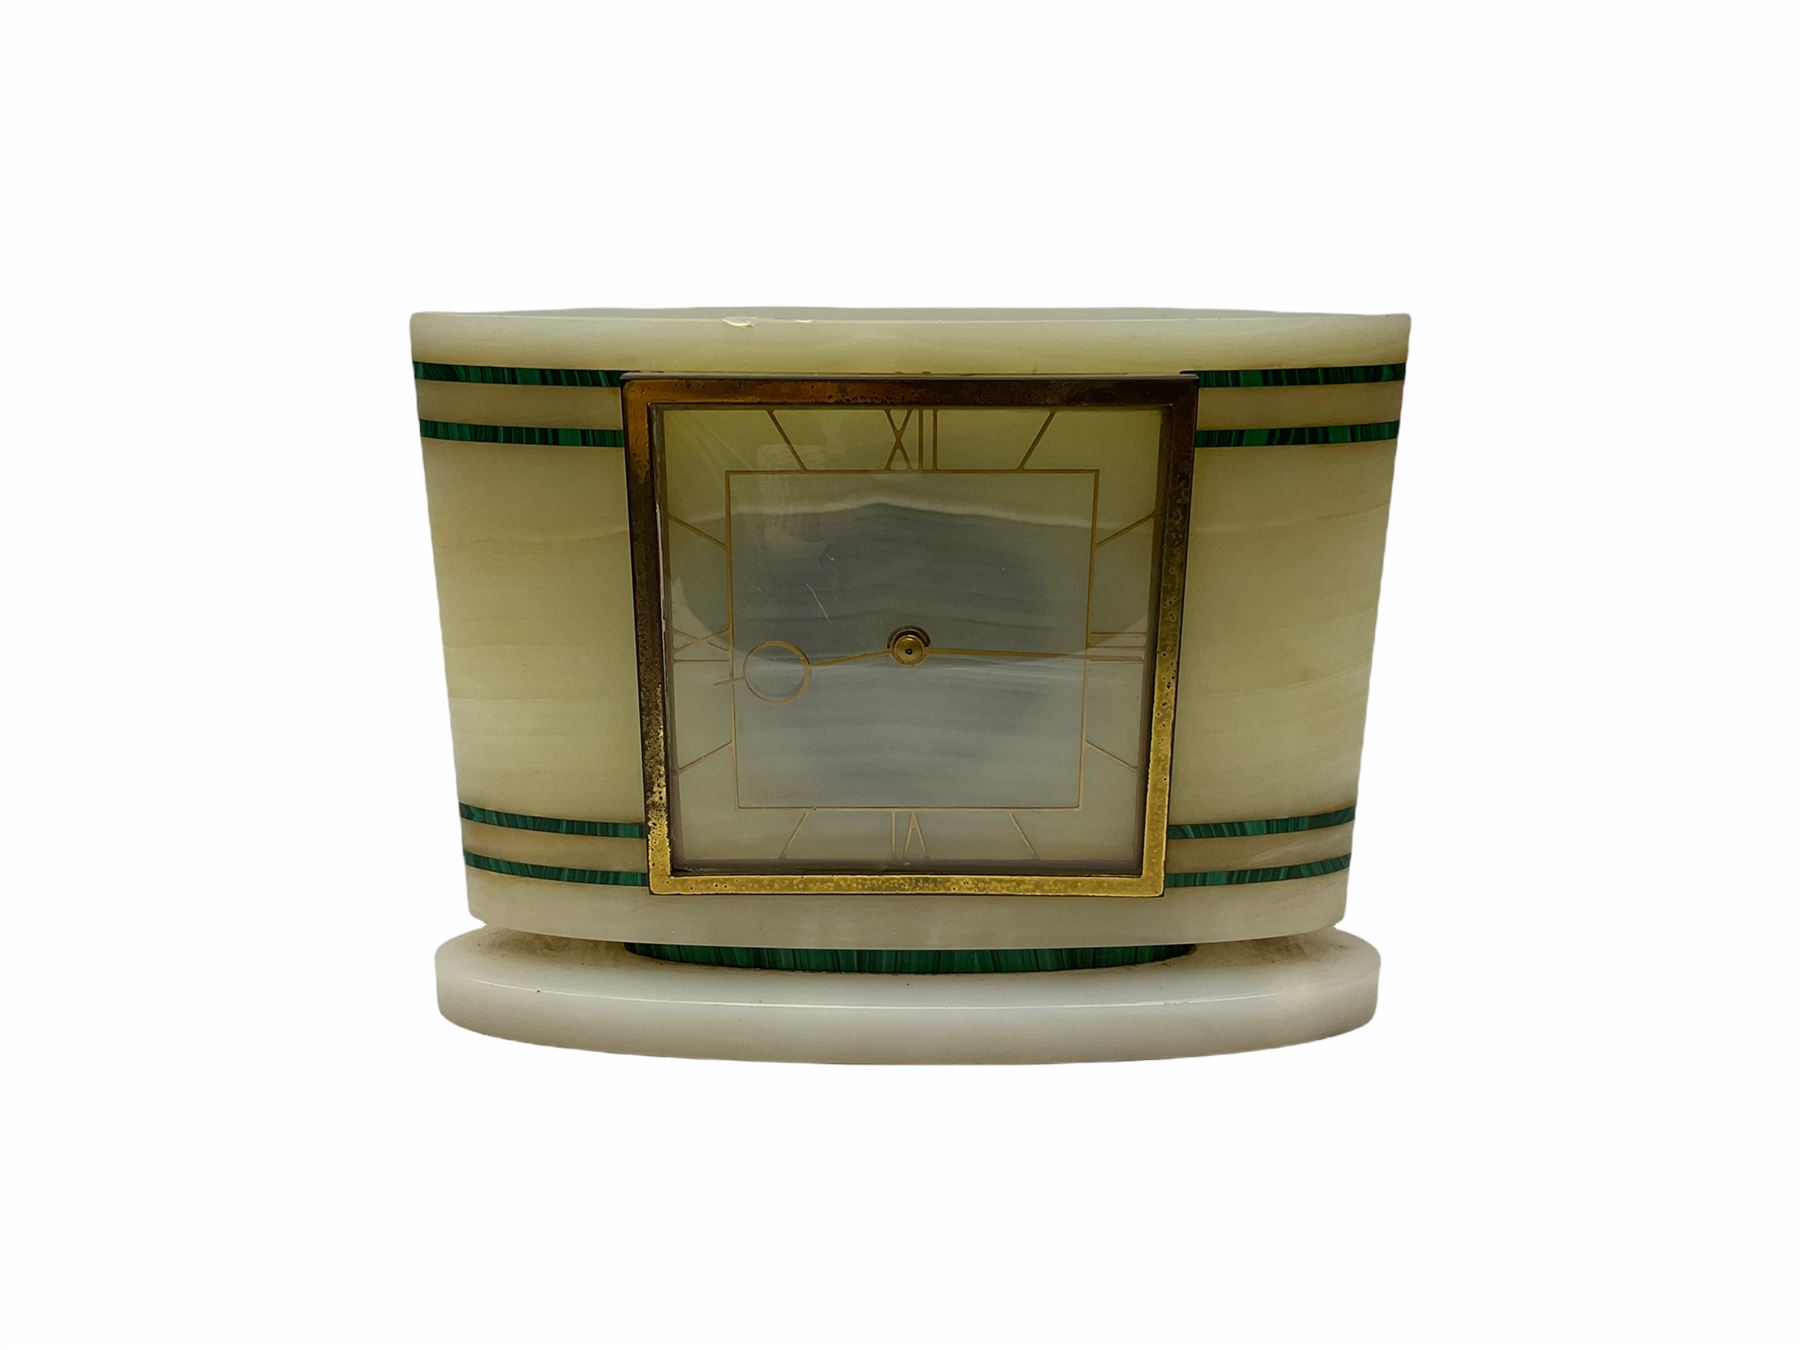 Smiths Industries SEC mains electric driven mantle clock in a rectangular Art Deco alabaster case in - Image 3 of 4